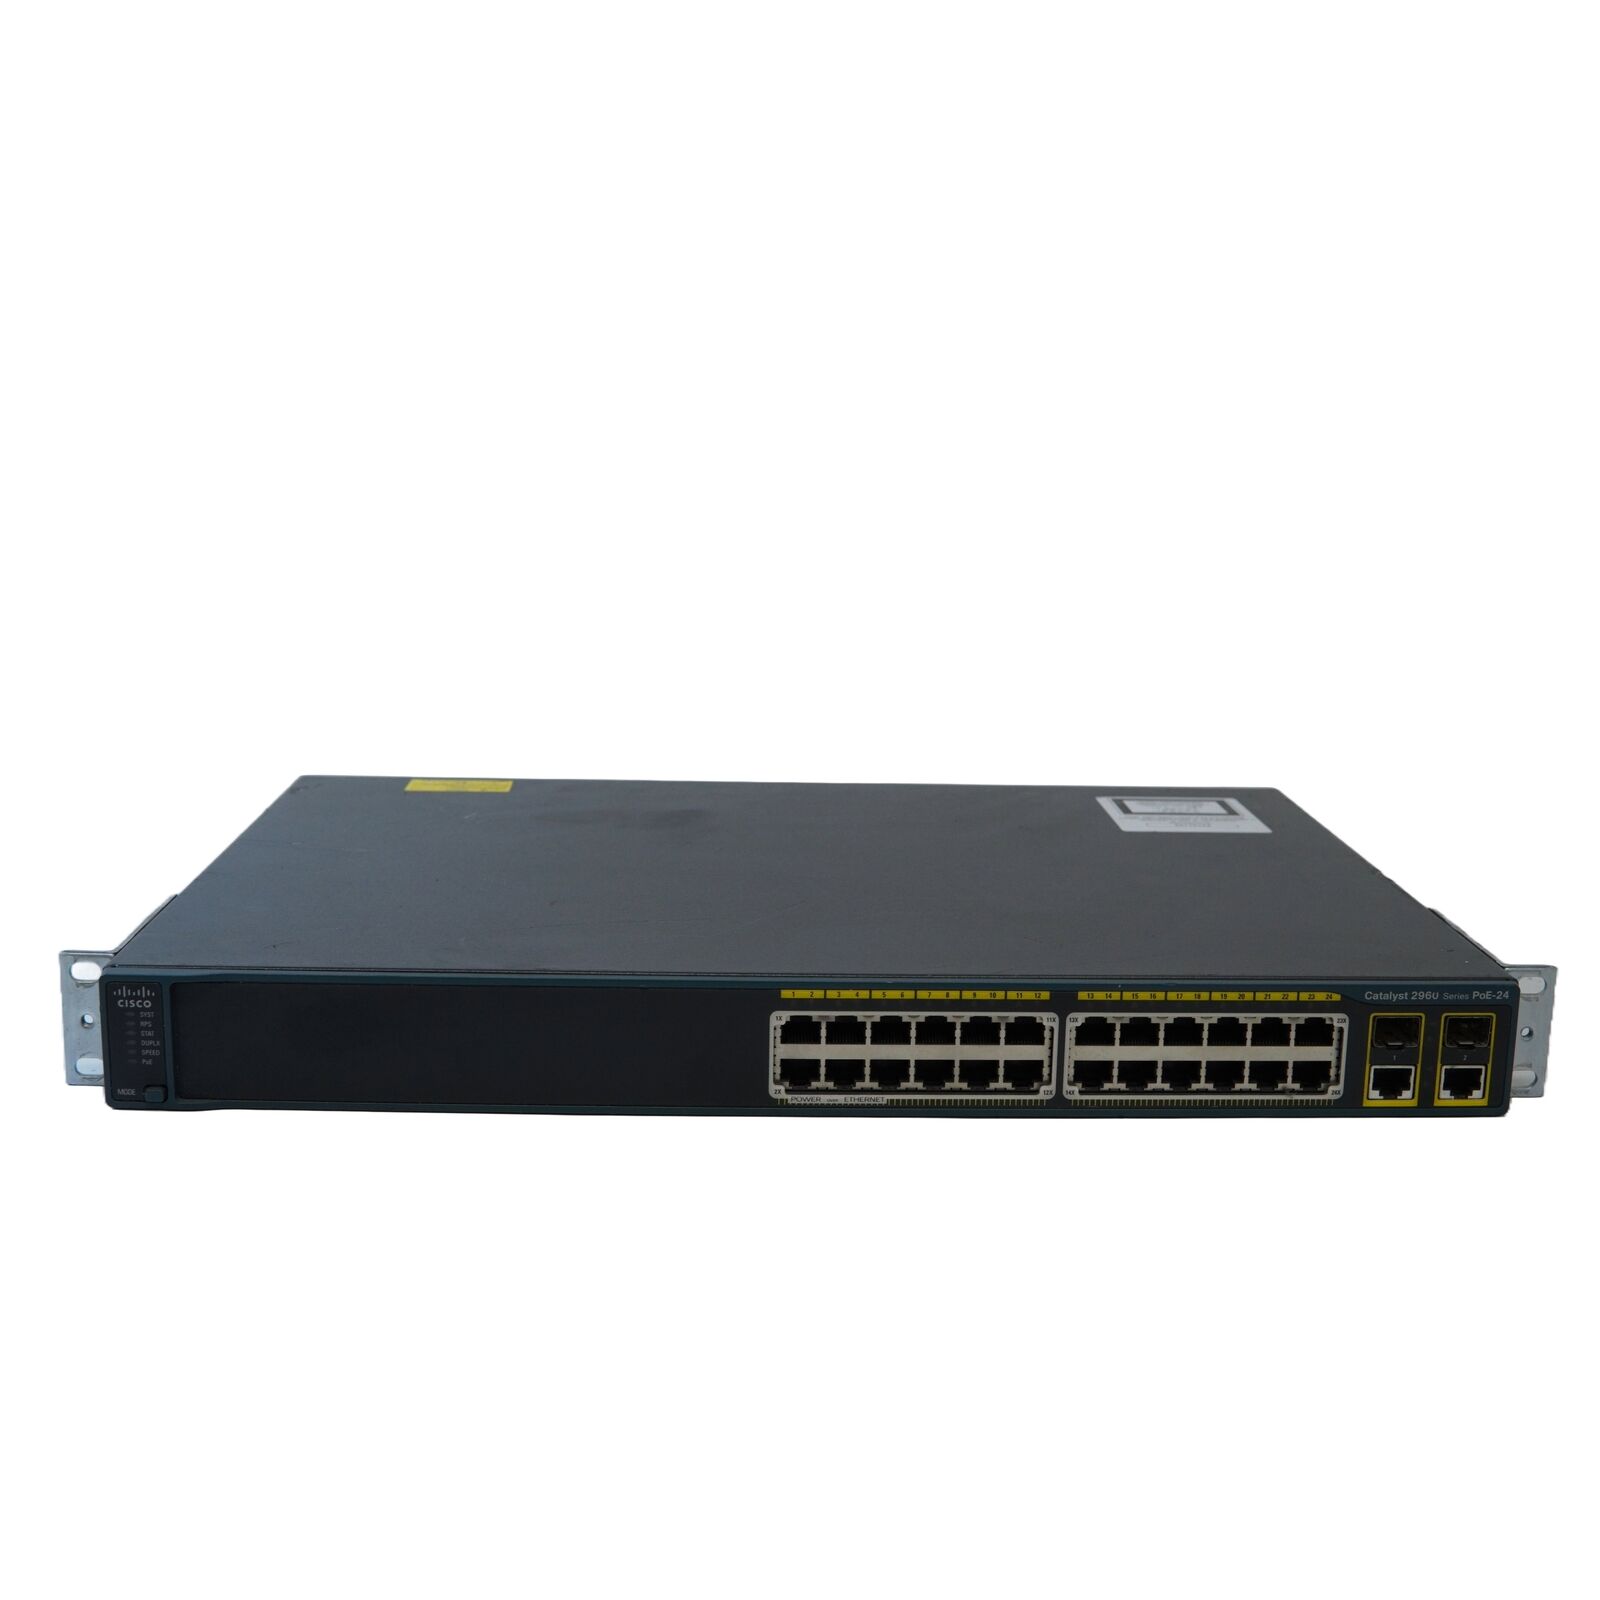 Cisco WS-C2960-24PC-L 24-Port Managed Fast Ethernet Switch